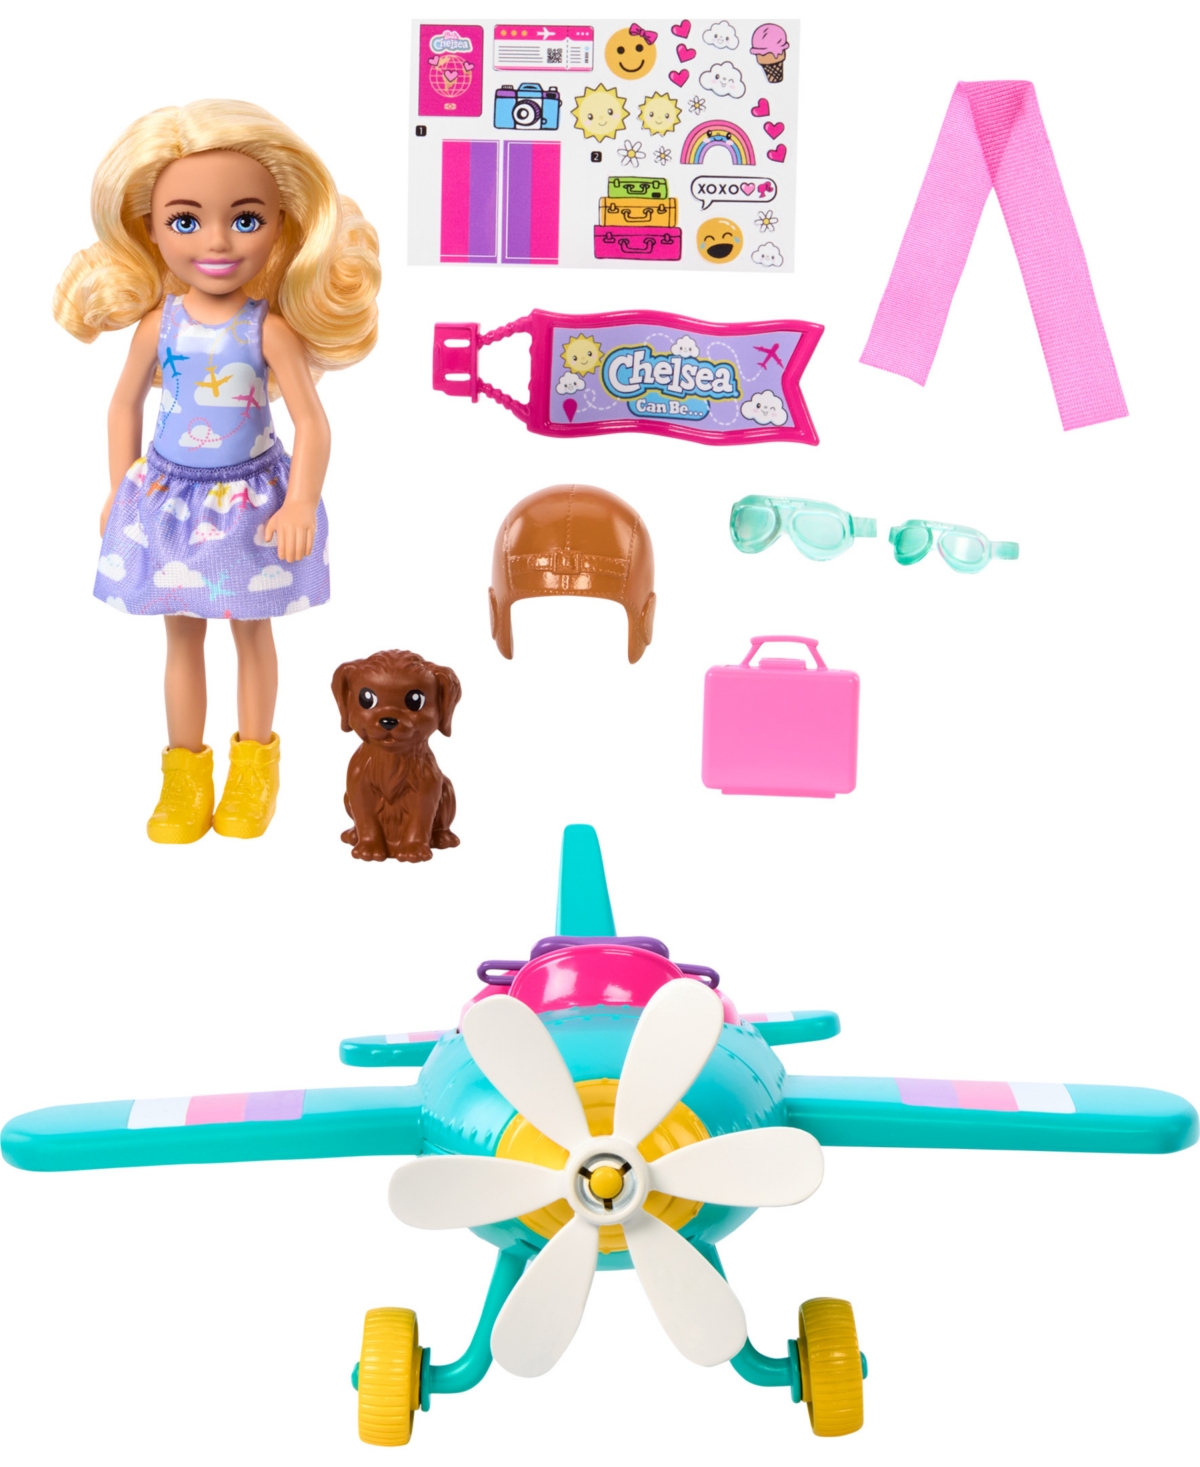 Shop Barbie Chelsea Can Be Plane Doll And Play Set, 2-seater Aircraft With Spinning Propeller And 7 Accessories In Multi